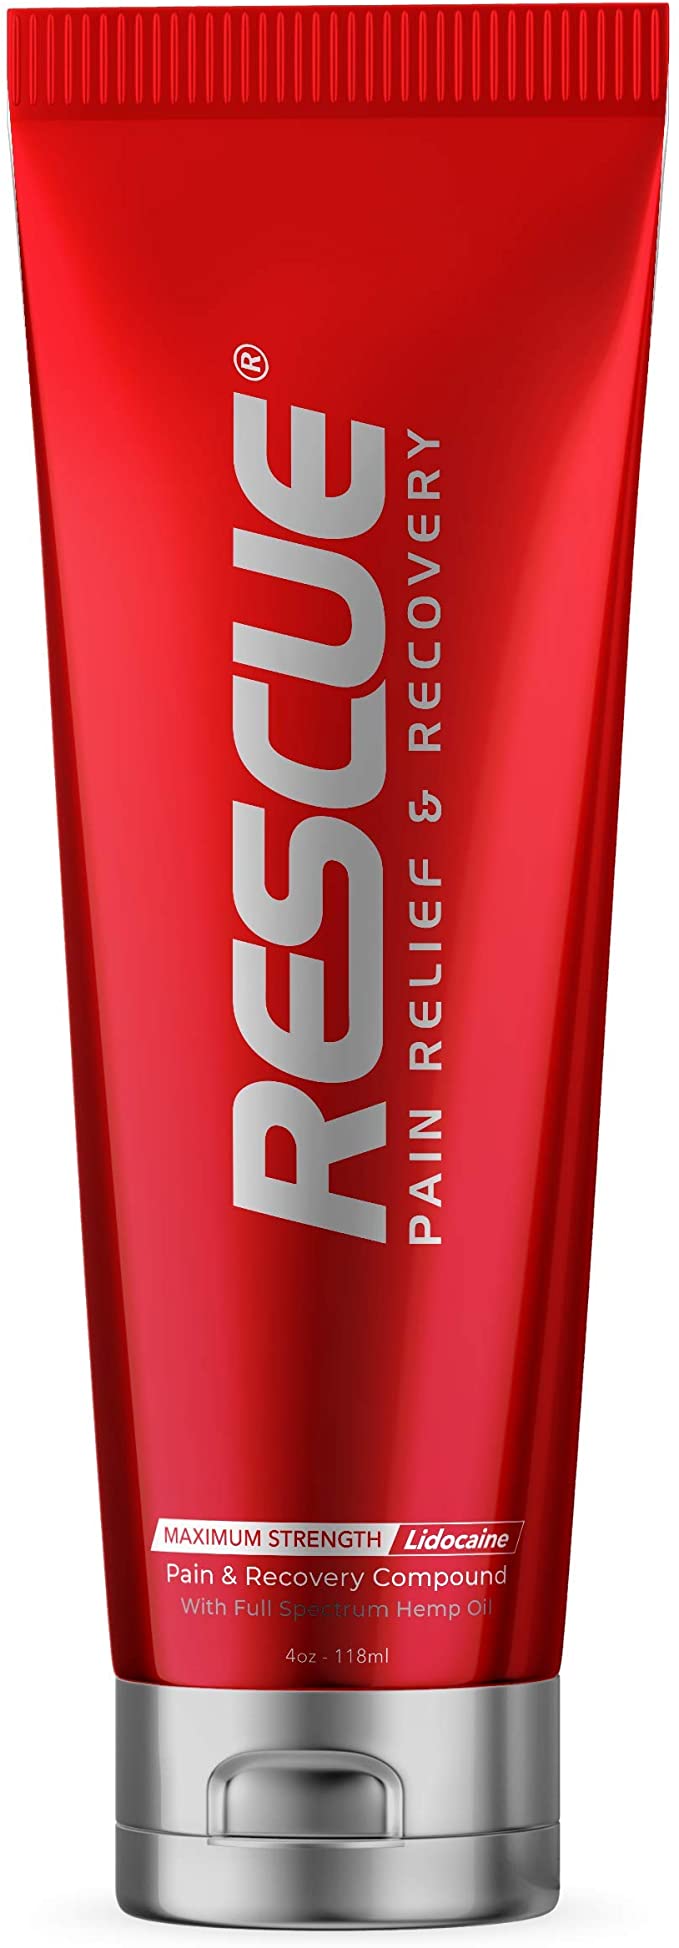 Rescue Pain Relief and Recovery Cream 4 oz Maximum Strength Lidocaine HCl 4% OTC made in the USA - 10+ Ingredients to Fight Inflammation and Soothe Stiff, Aching Muscles, tendons, ligaments and Joints